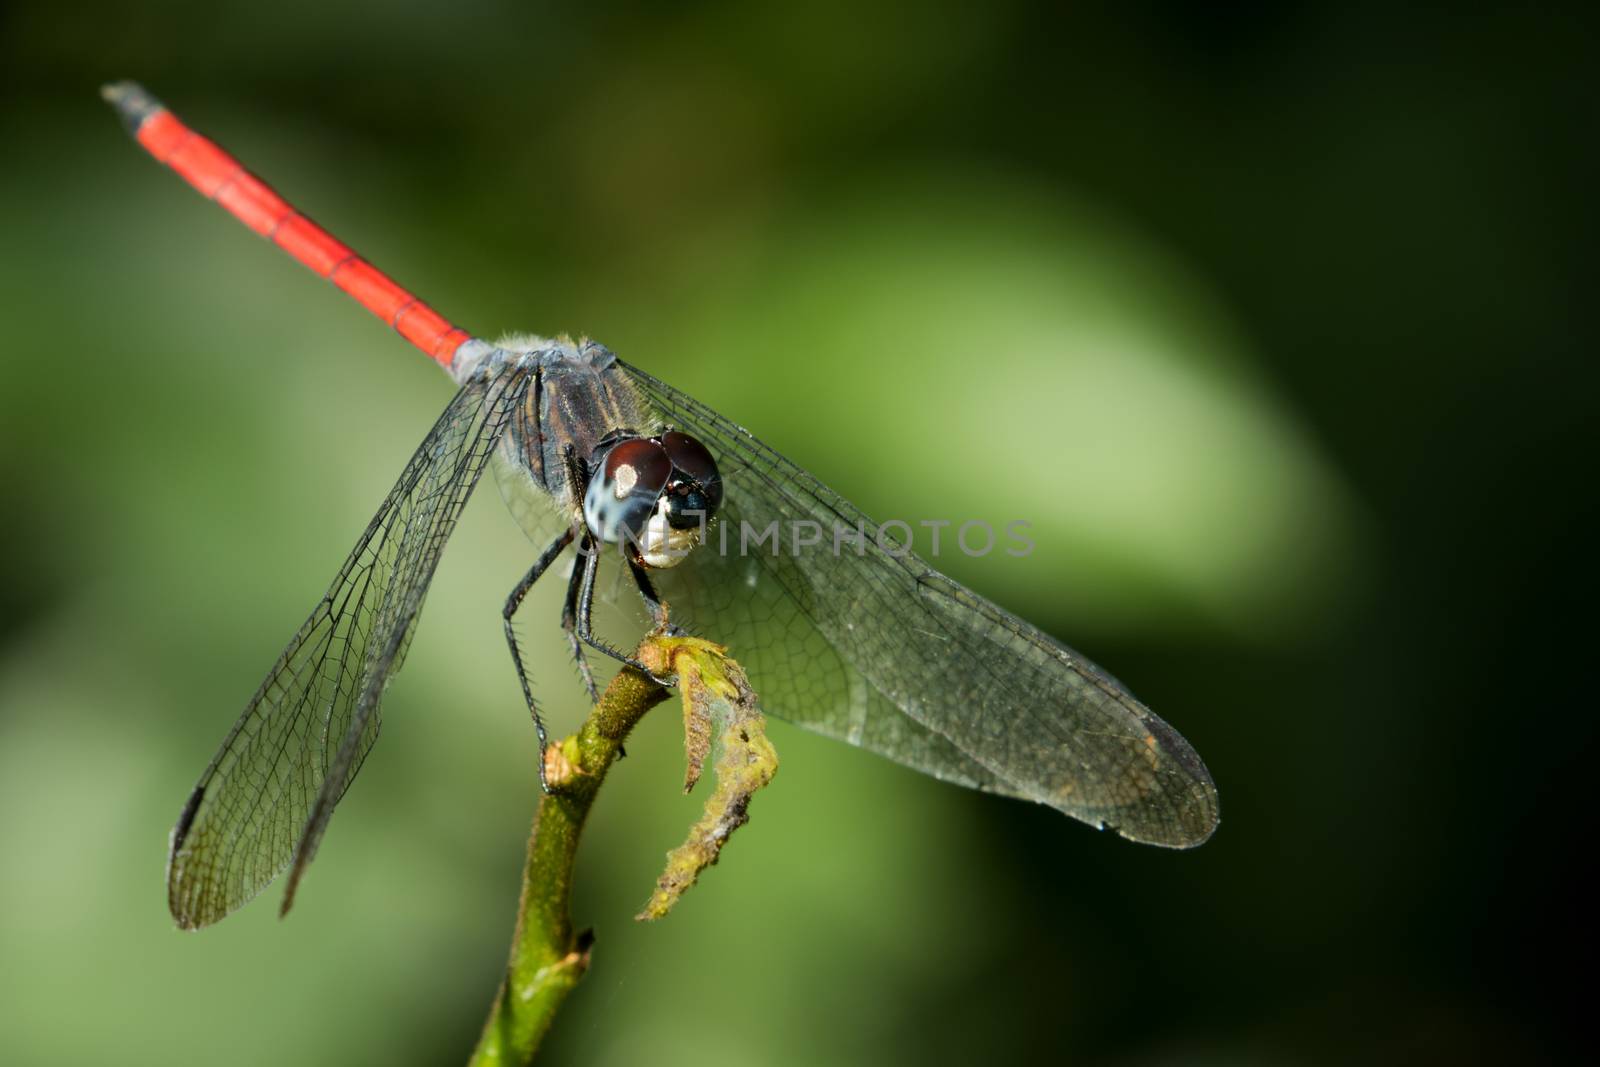 Image of dragonfly perched on a tree branch by yod67